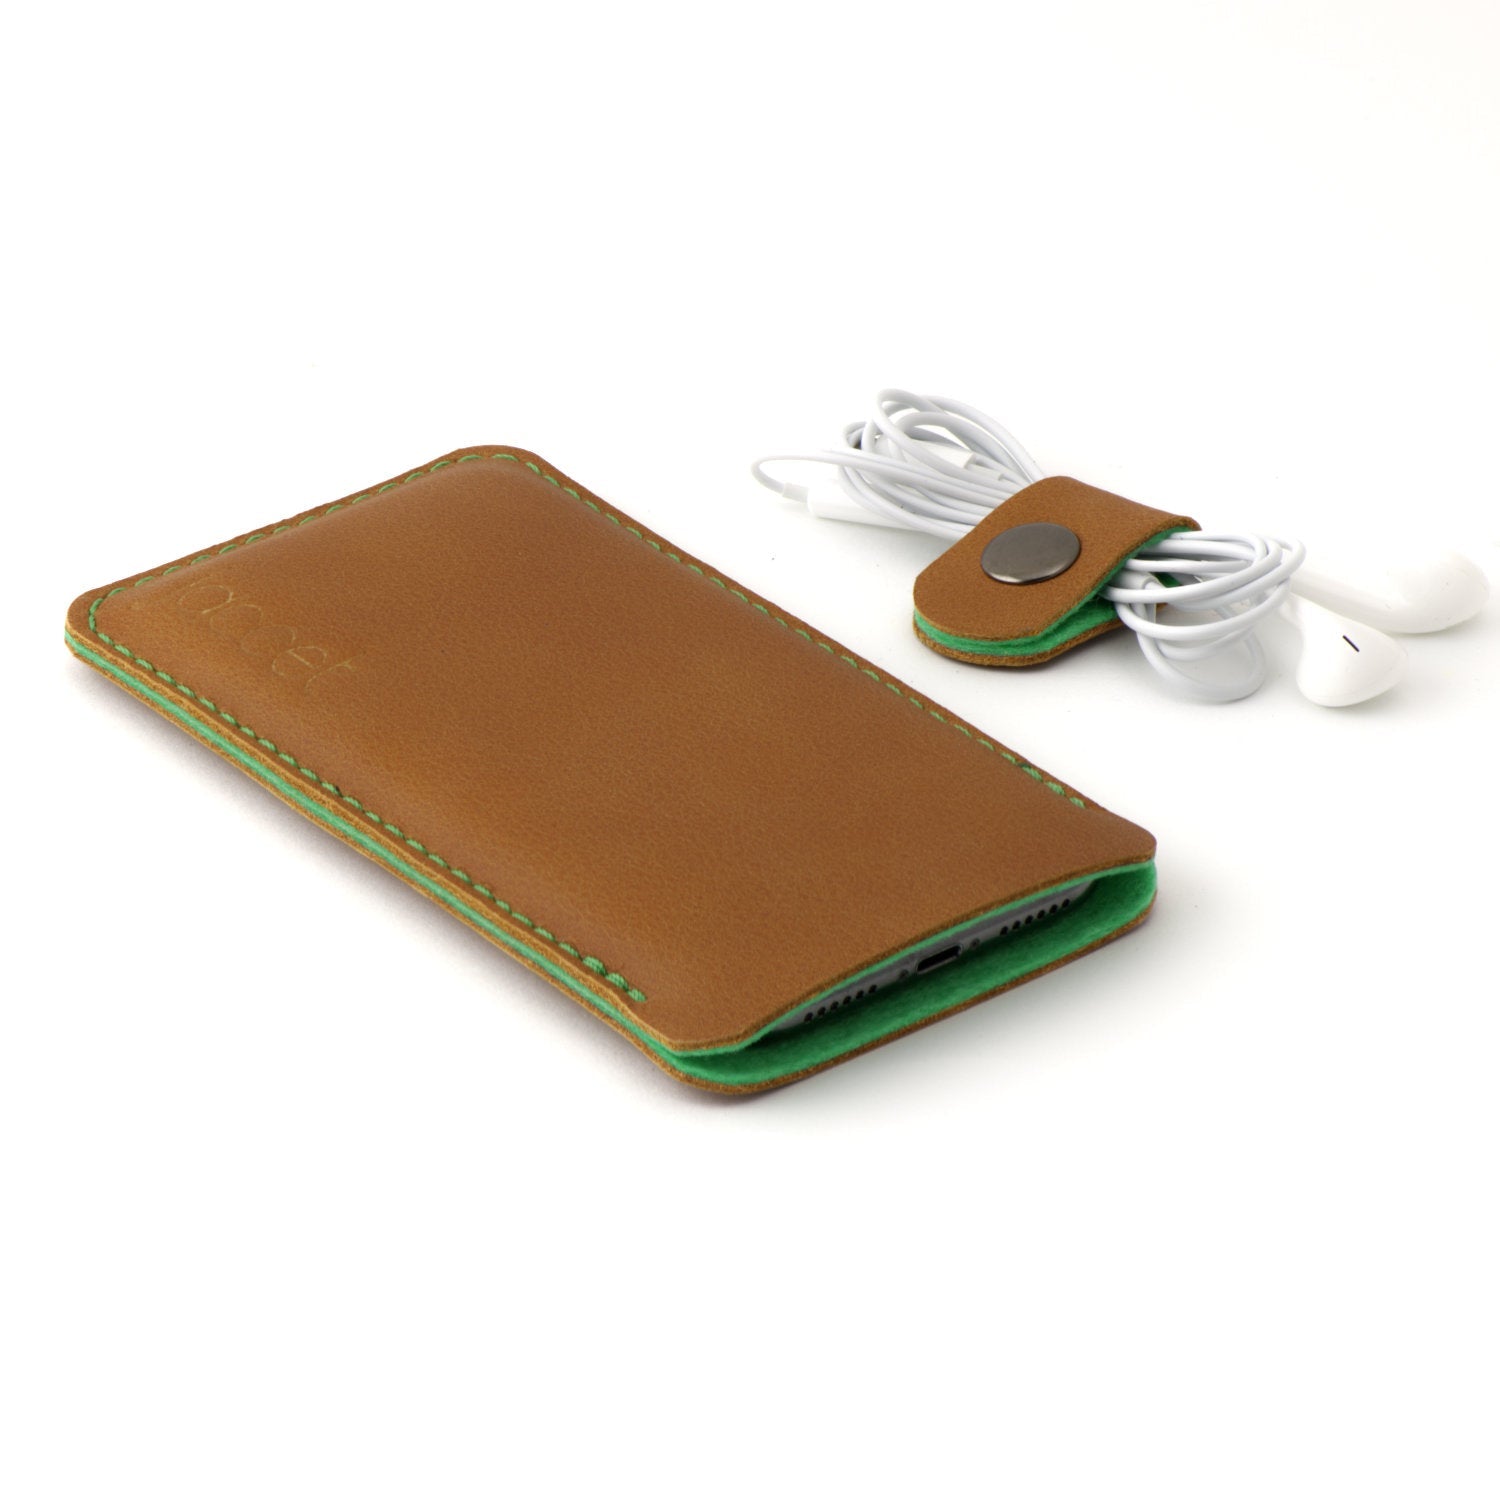 JACCET leather OnePlus sleeve - Cognac color leather with green wool felt - 100% Handmade